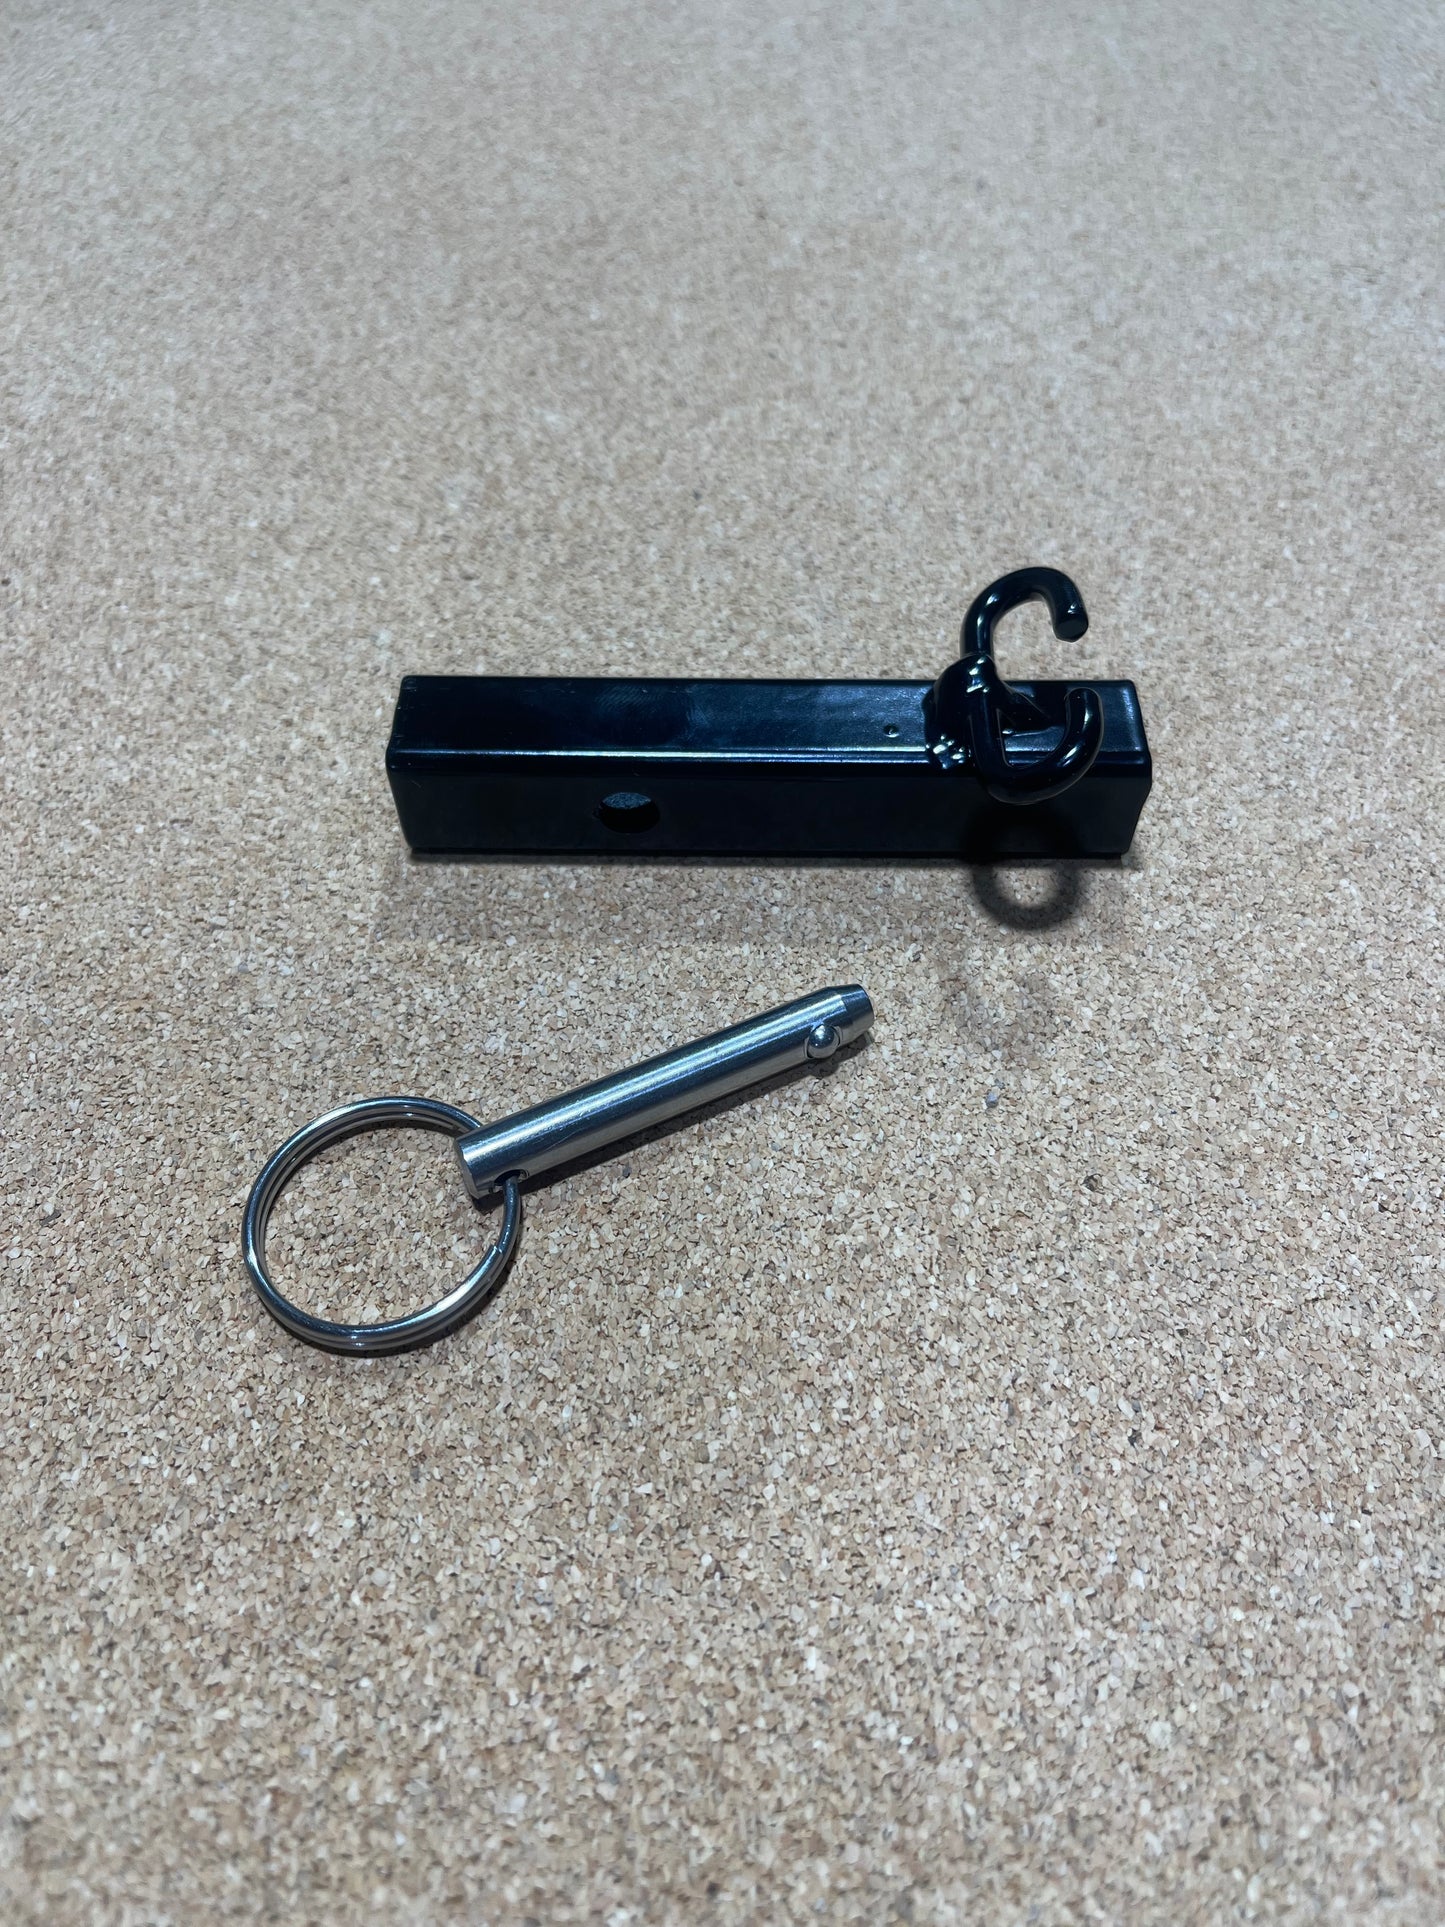 Replacement undermount rope guide with pin for TopHand